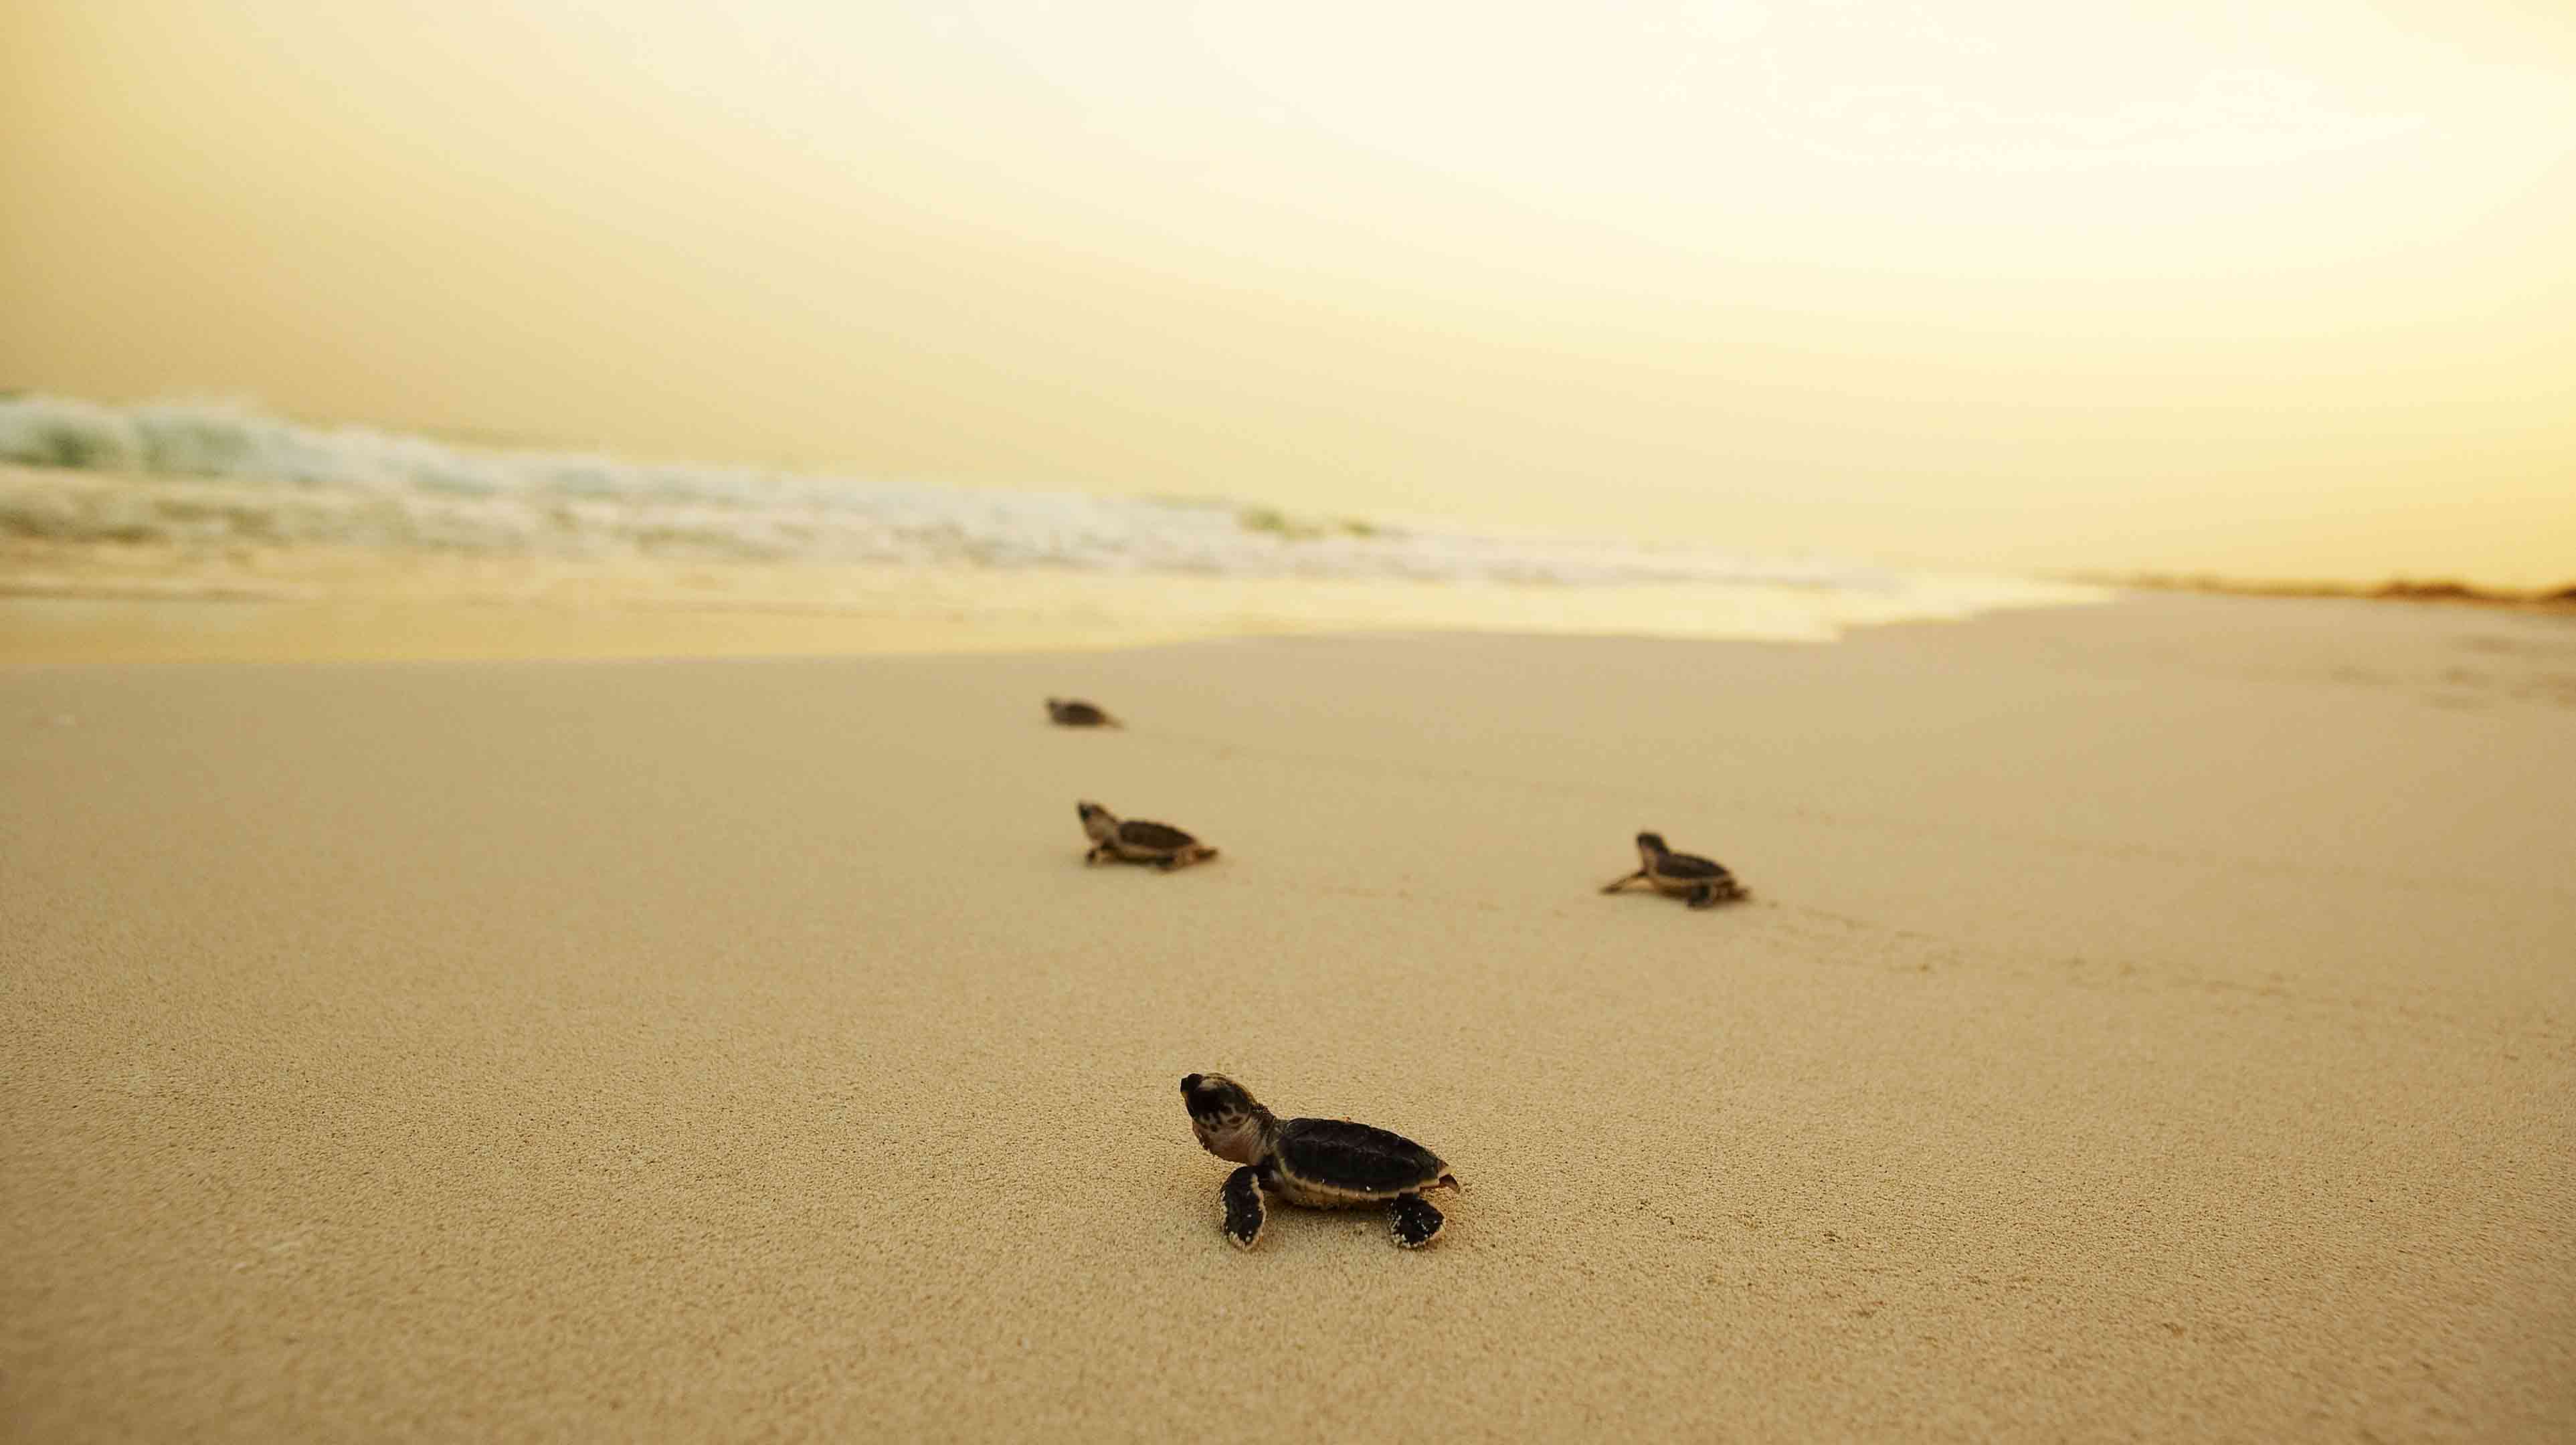 Baby turtles crawling on the golden sands towards the water on one of Abu Dhabi's islands